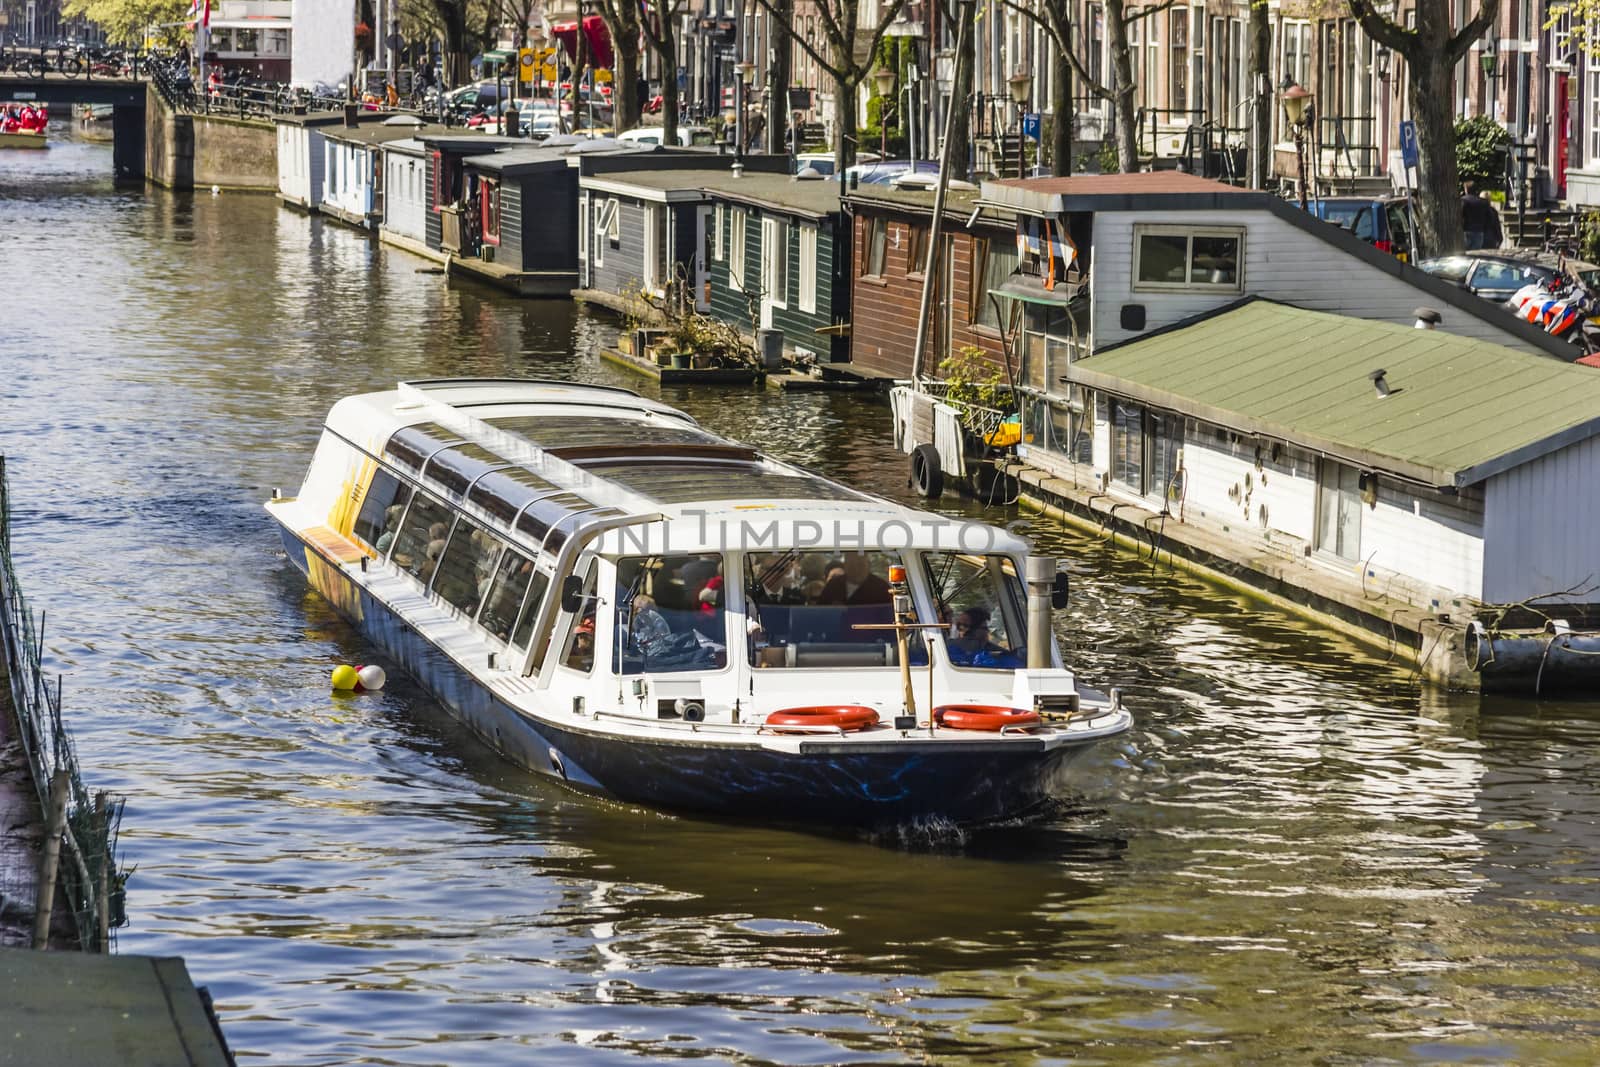 View on houseboats, Amsterdam, the Netherlands by Tetyana